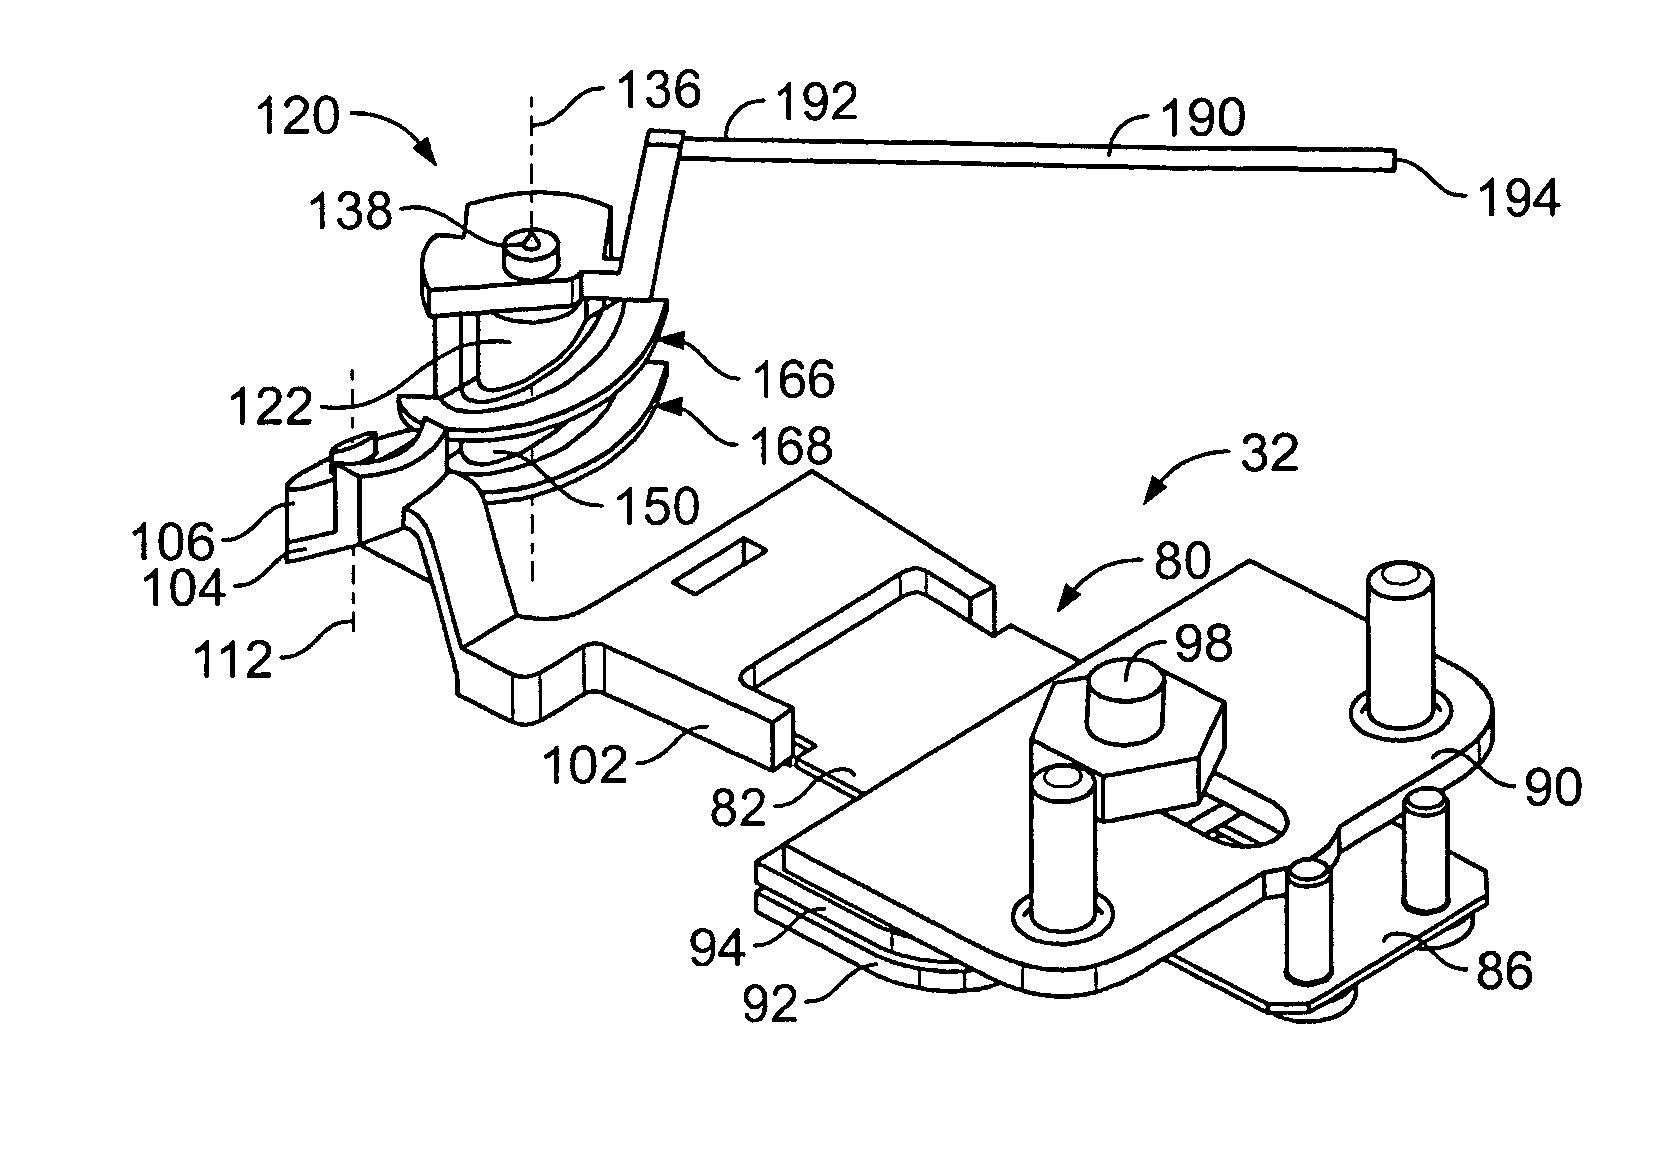 Gauge having a magnetically driven pointer rotation device